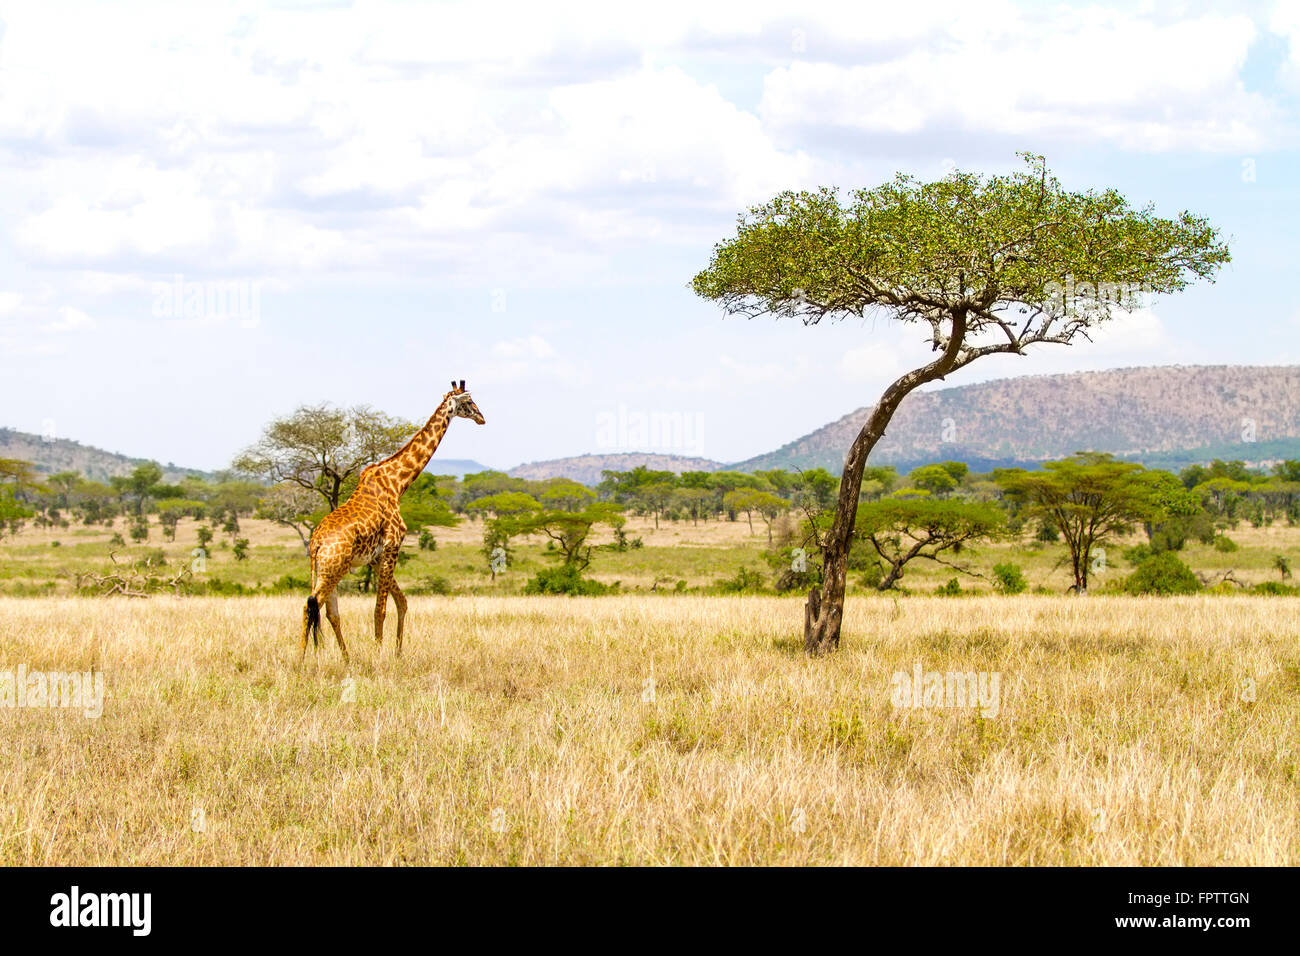 Large giraffe walks at the plains of Africa Stock Photo